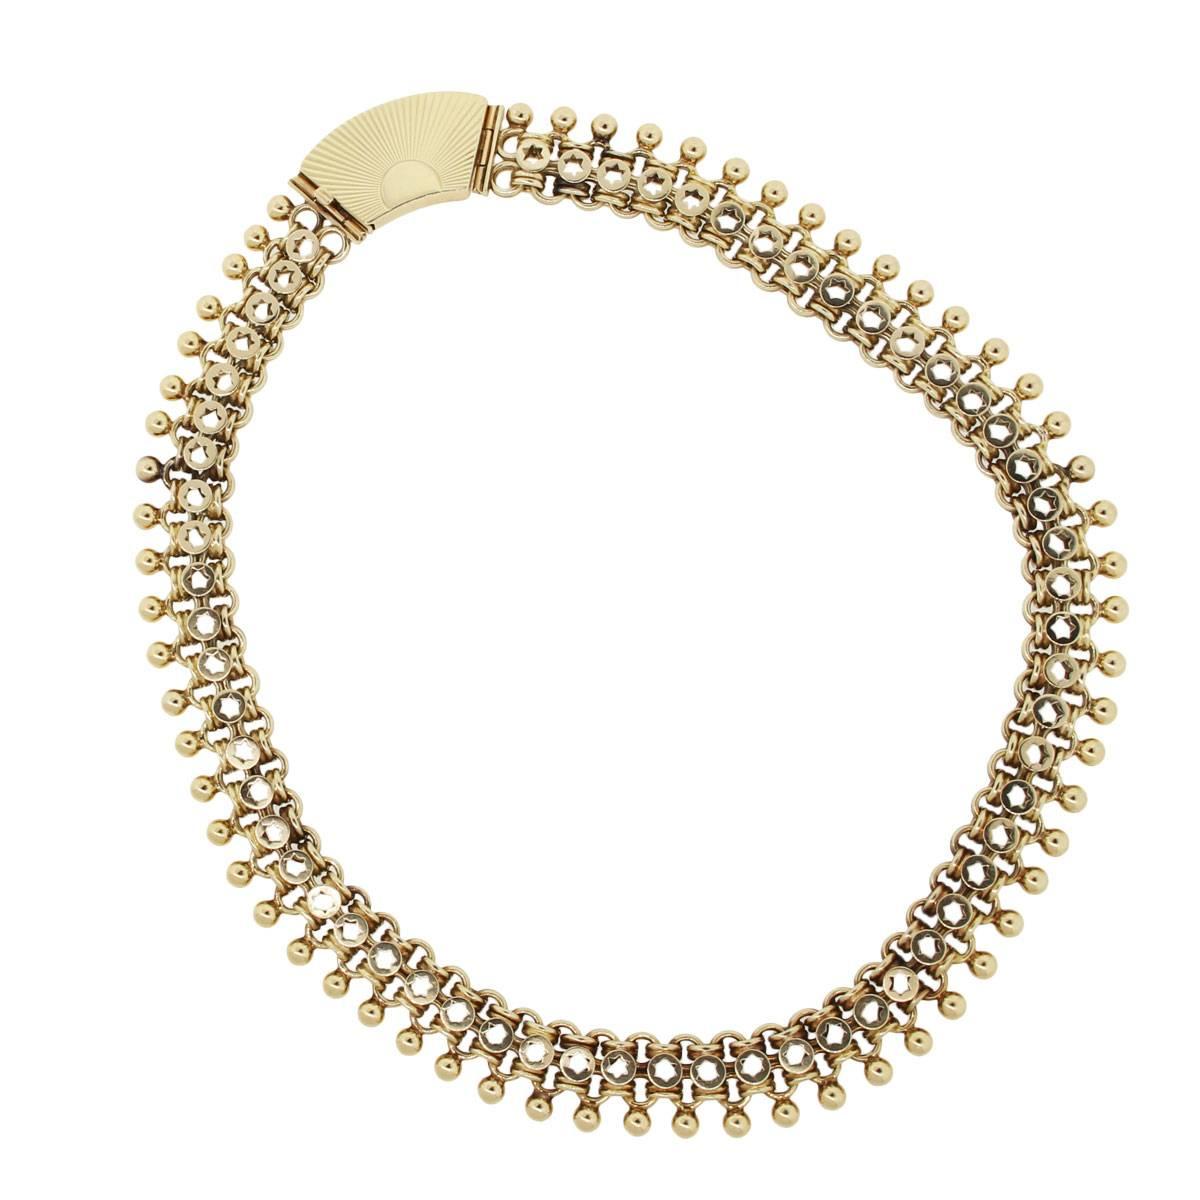 Material: 14k yellow gold
Necklace Measurements: 15.50″
Item Weight: 55.4g (35.6dwt)
Clasp: Tongue in box clasp
Additional Details: This item comes with a presentation box!
SKU: G7117